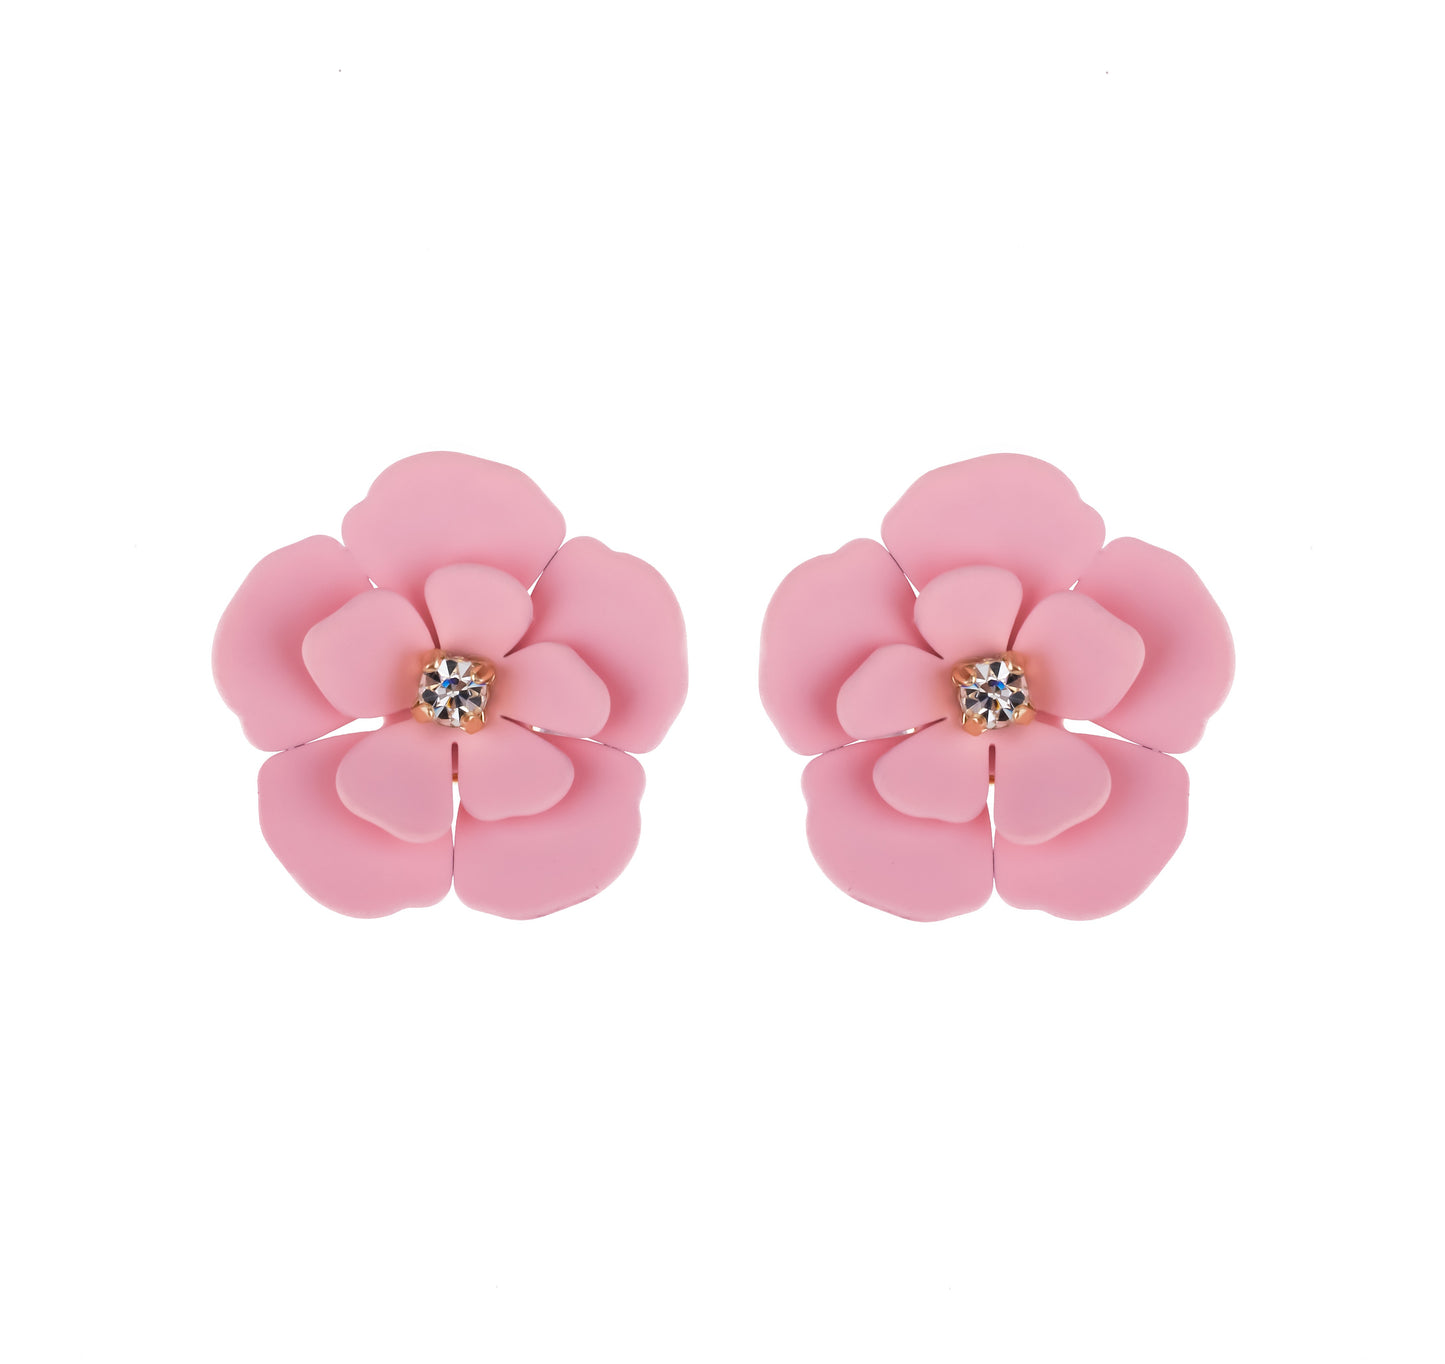 Pink Soft Touch Flower Stud Earring